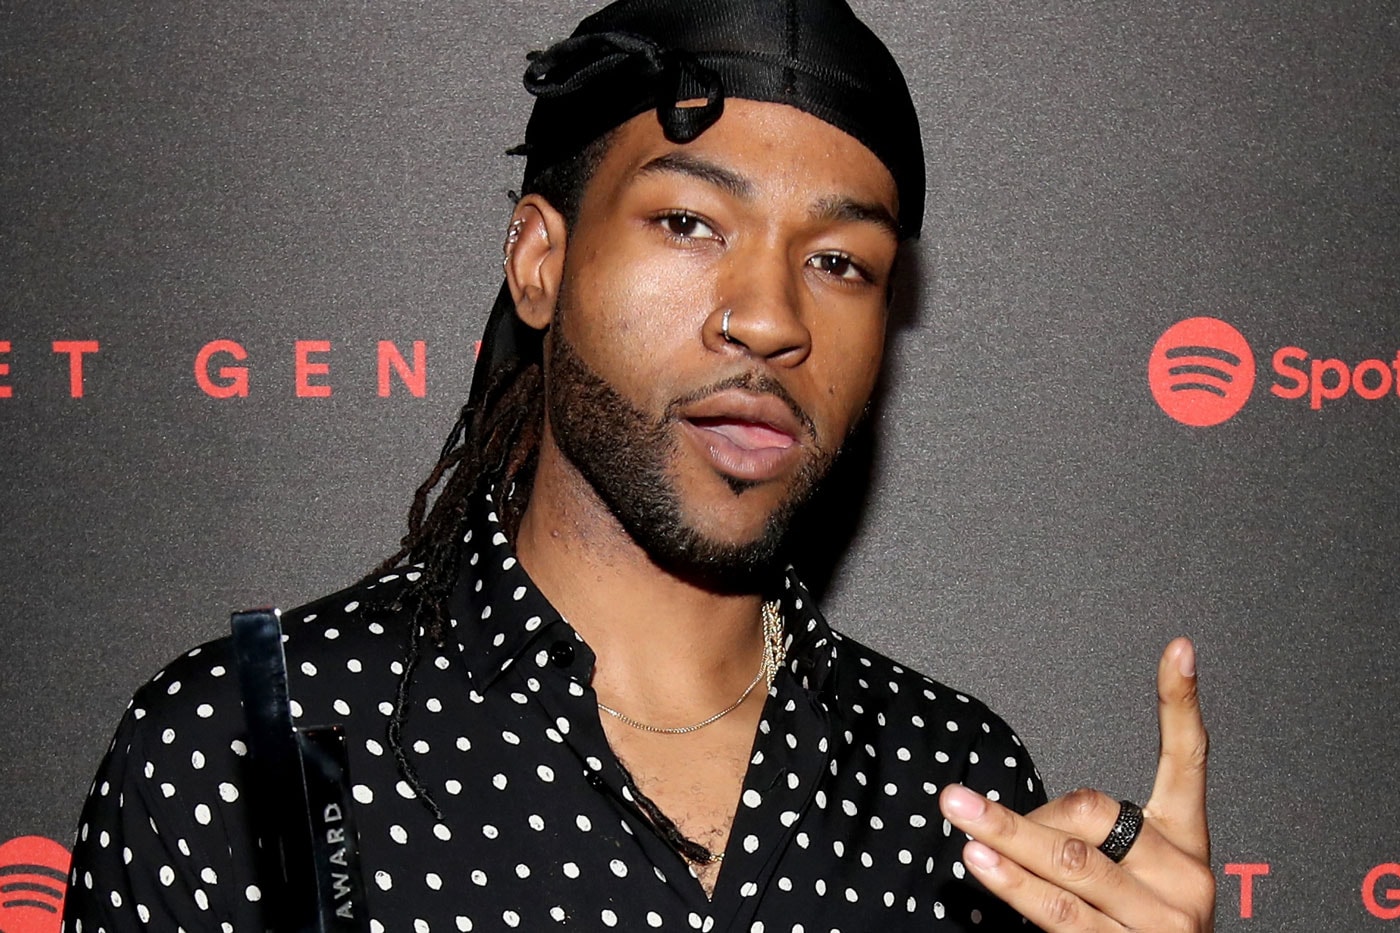 PARTYNEXTDOOR Shares New Song "Party At 8"